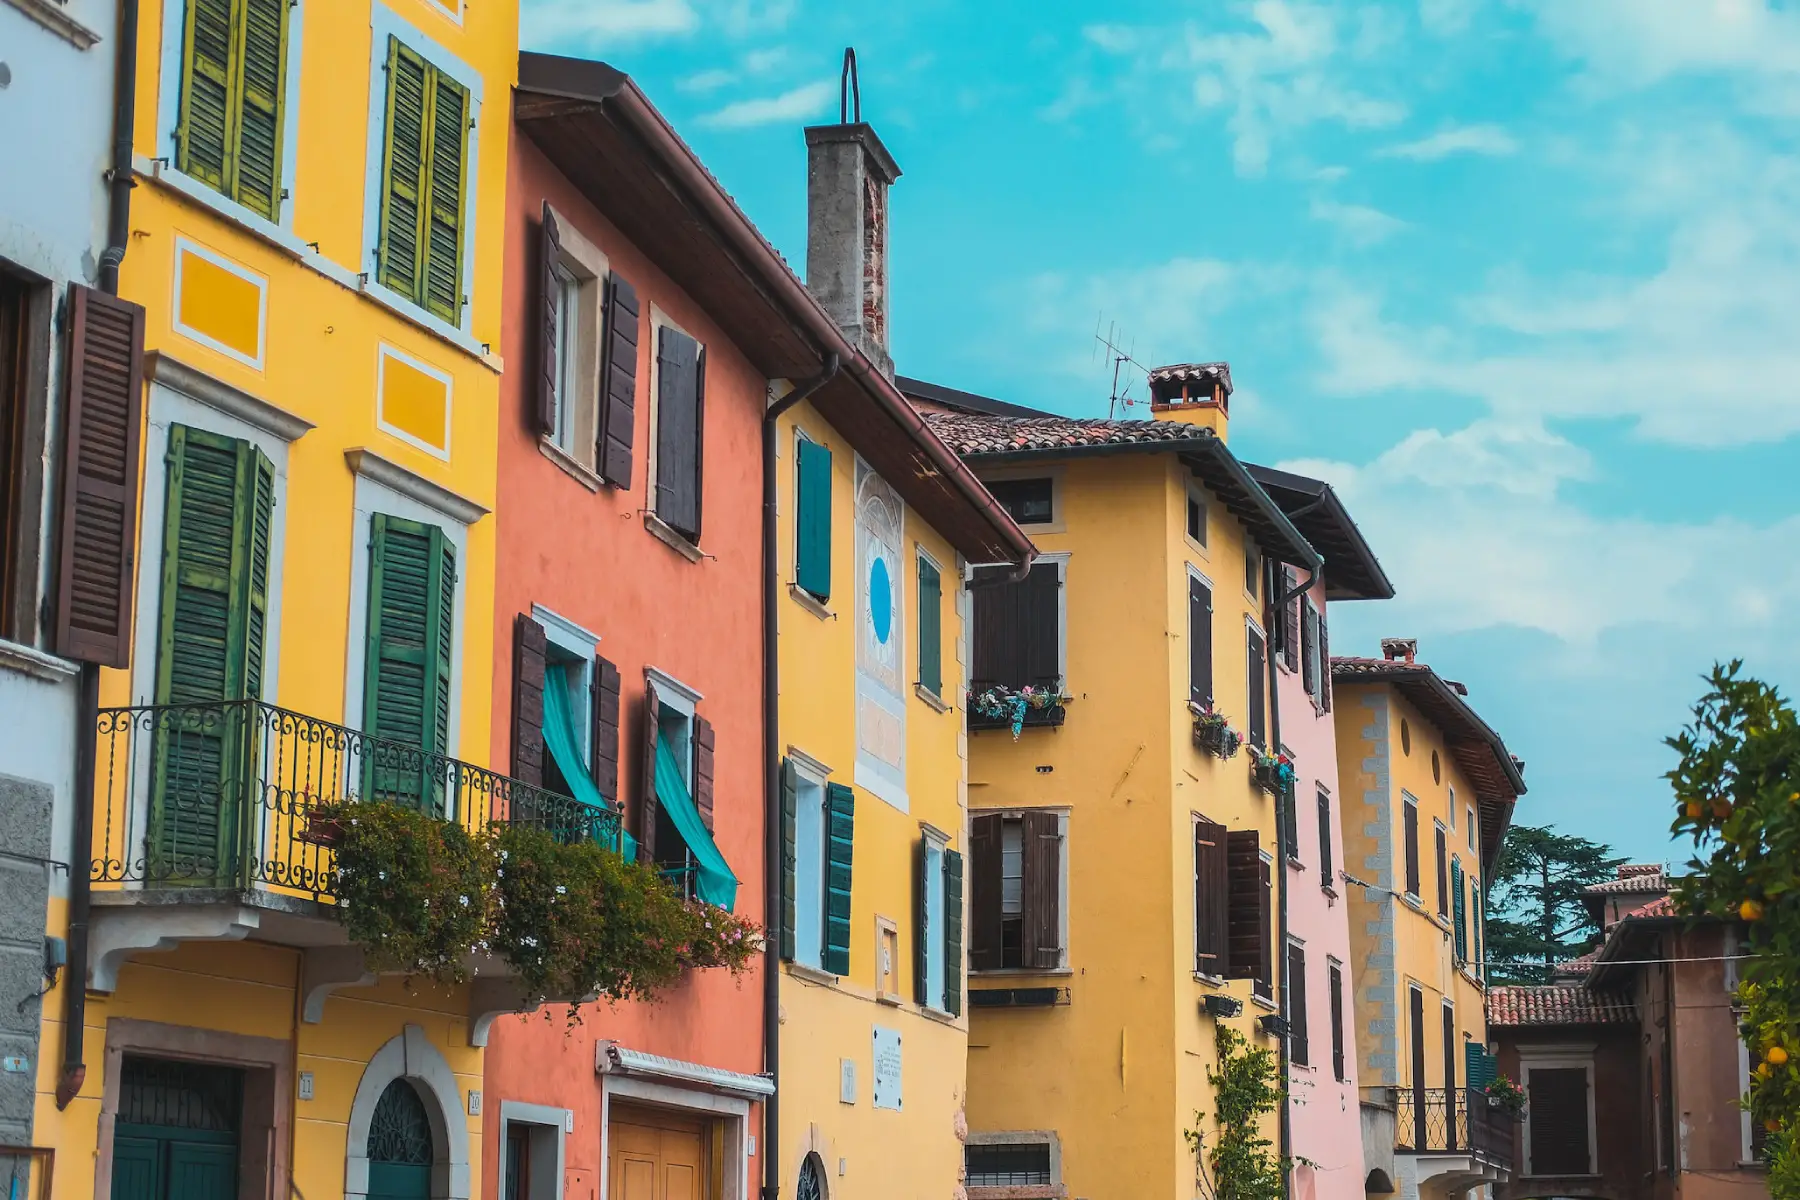 A row of colorful, traditional Italian houses with a bright blue sky above